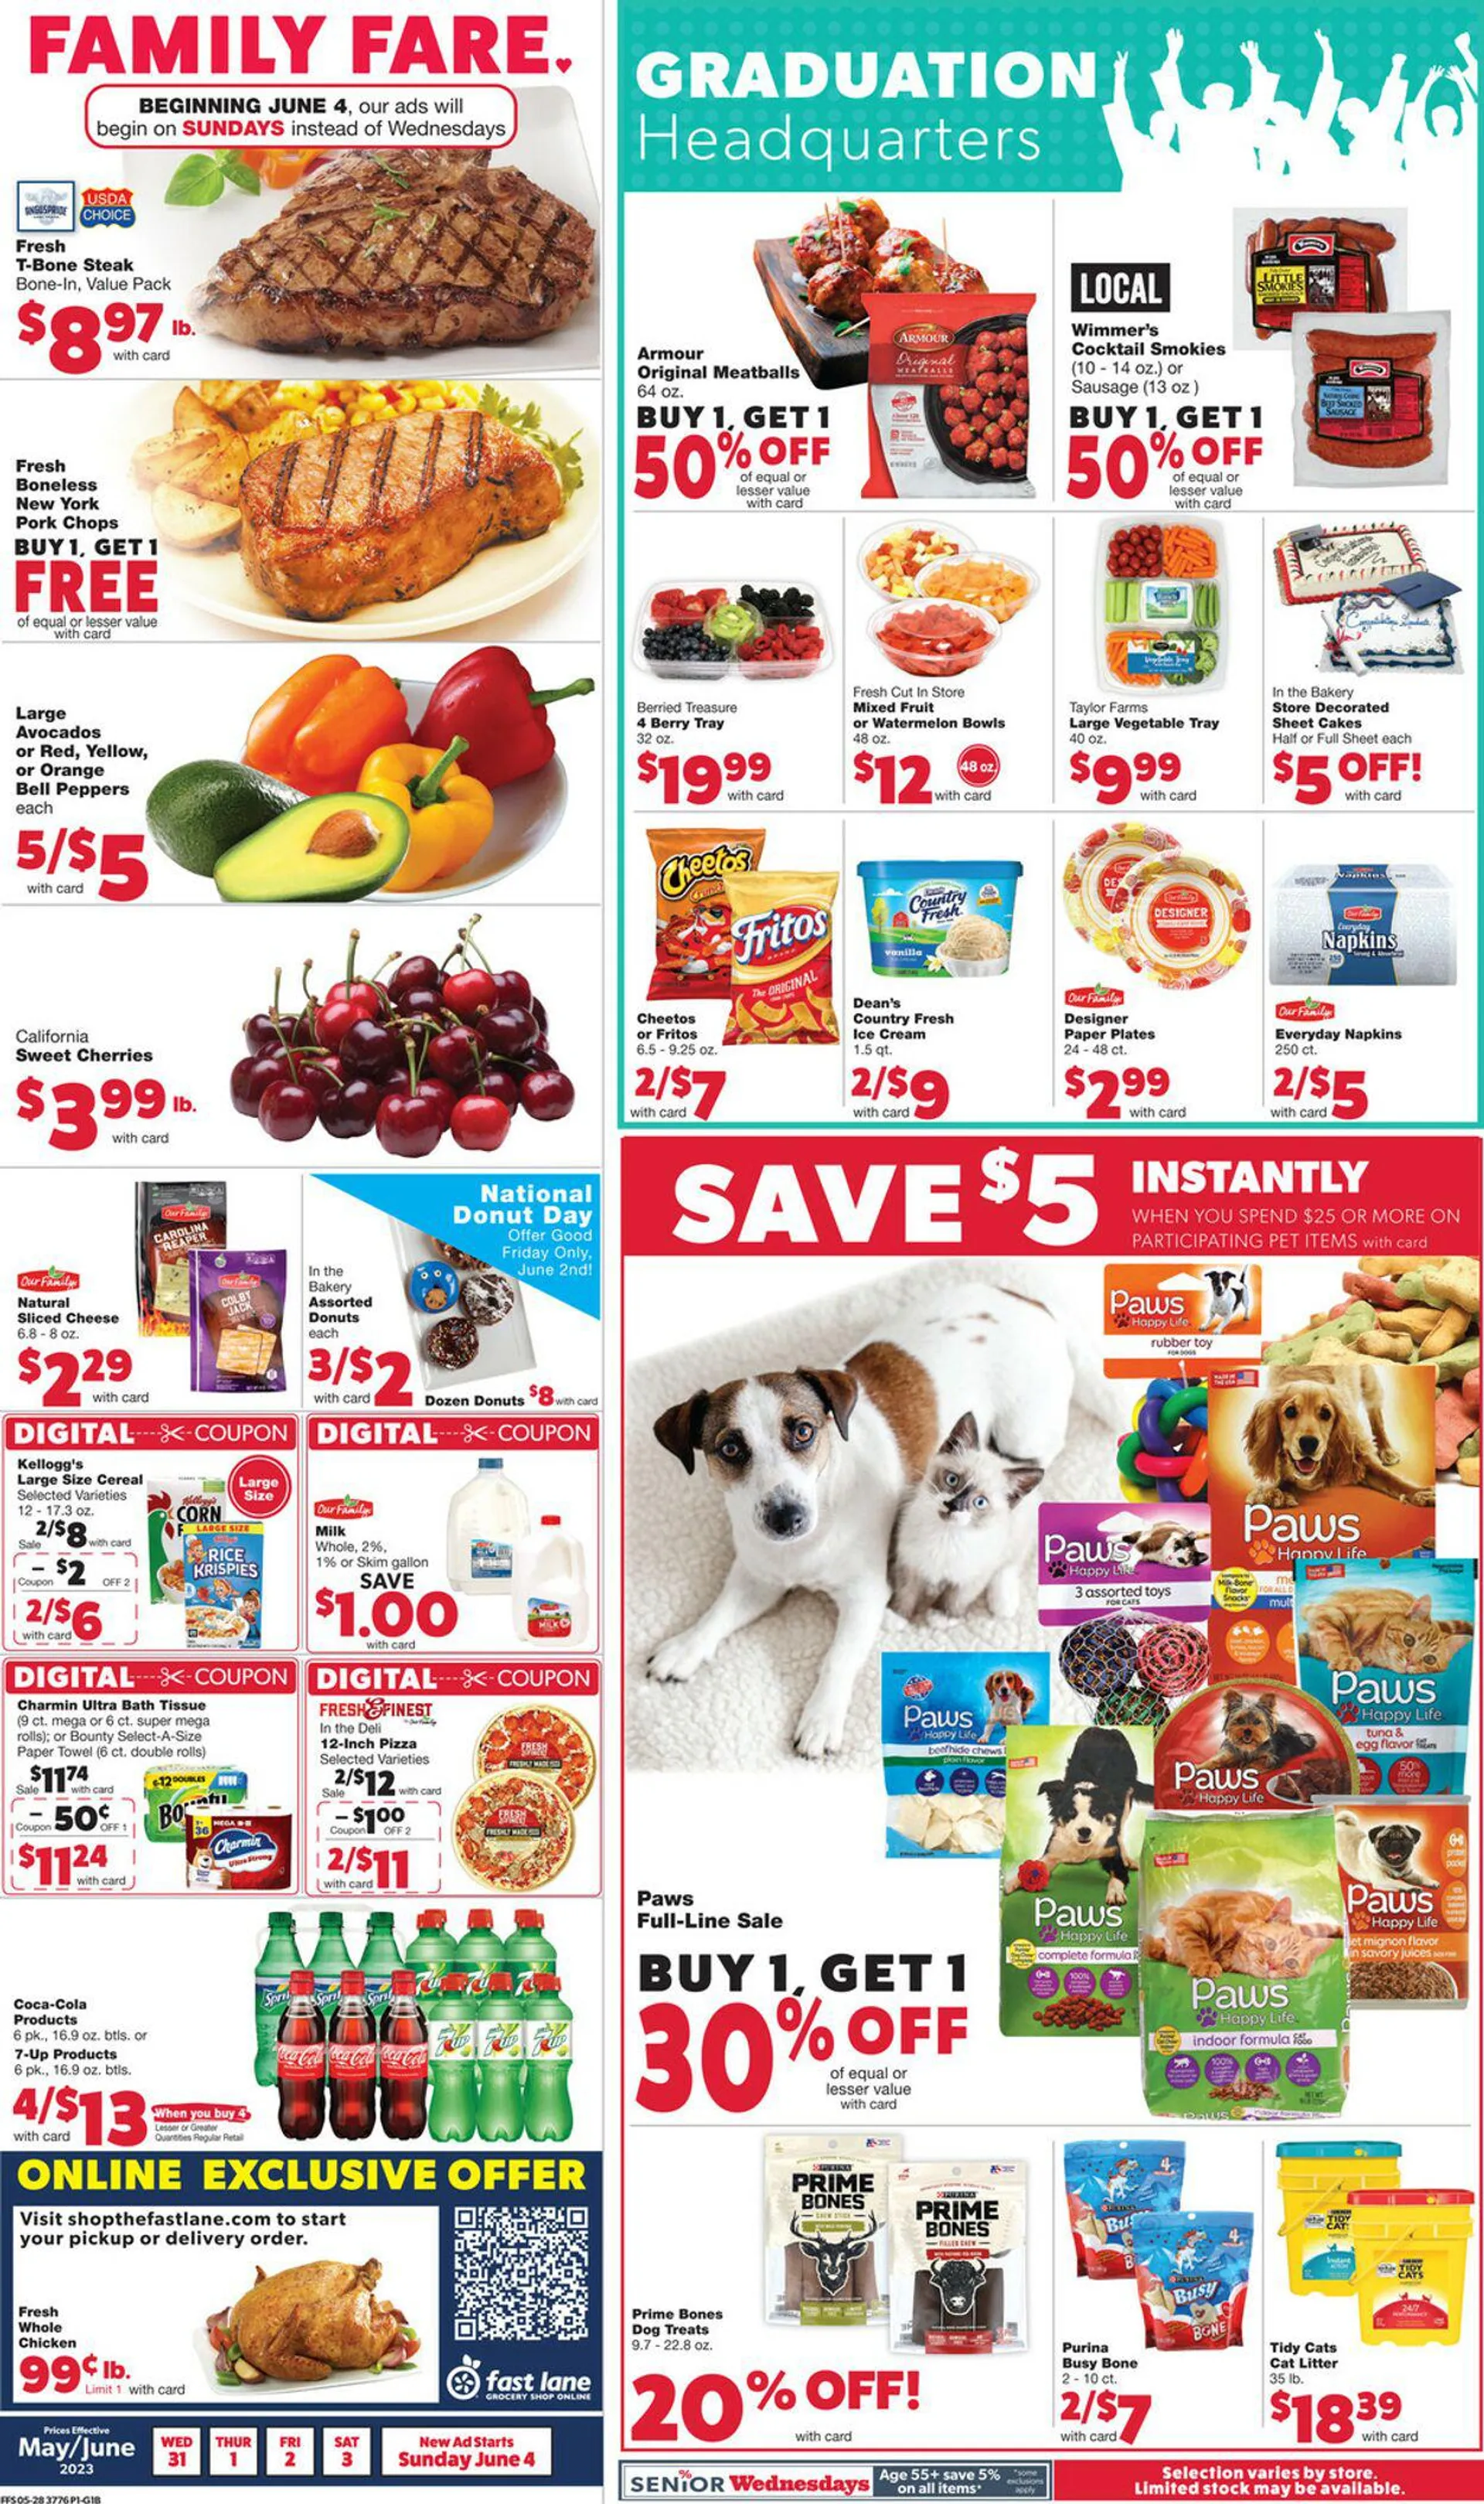 Family Fare Current weekly ad - 1